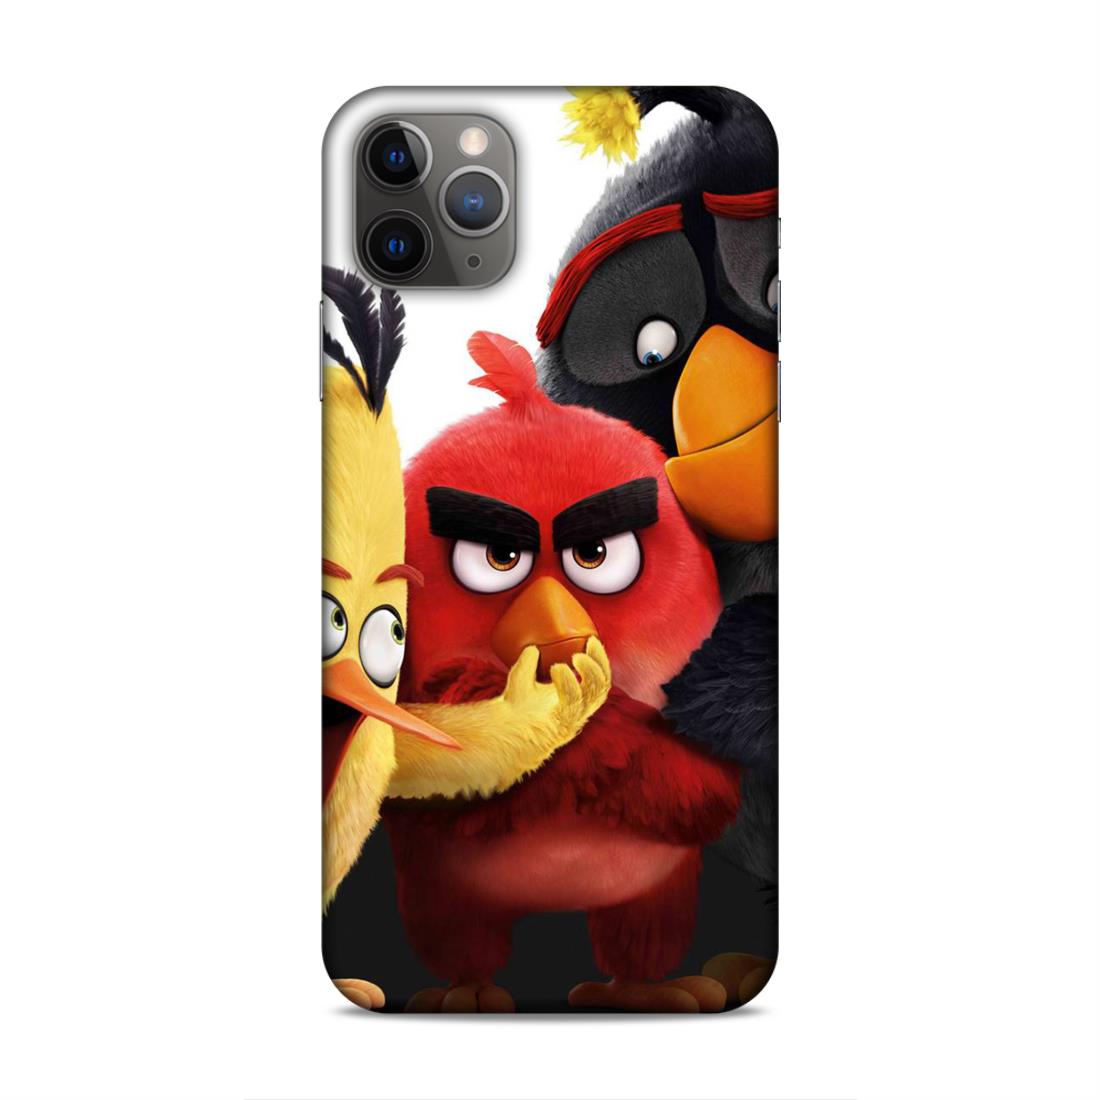 Angry Bird Smile Hard Back Case For Apple iPhone 11 Pro Max